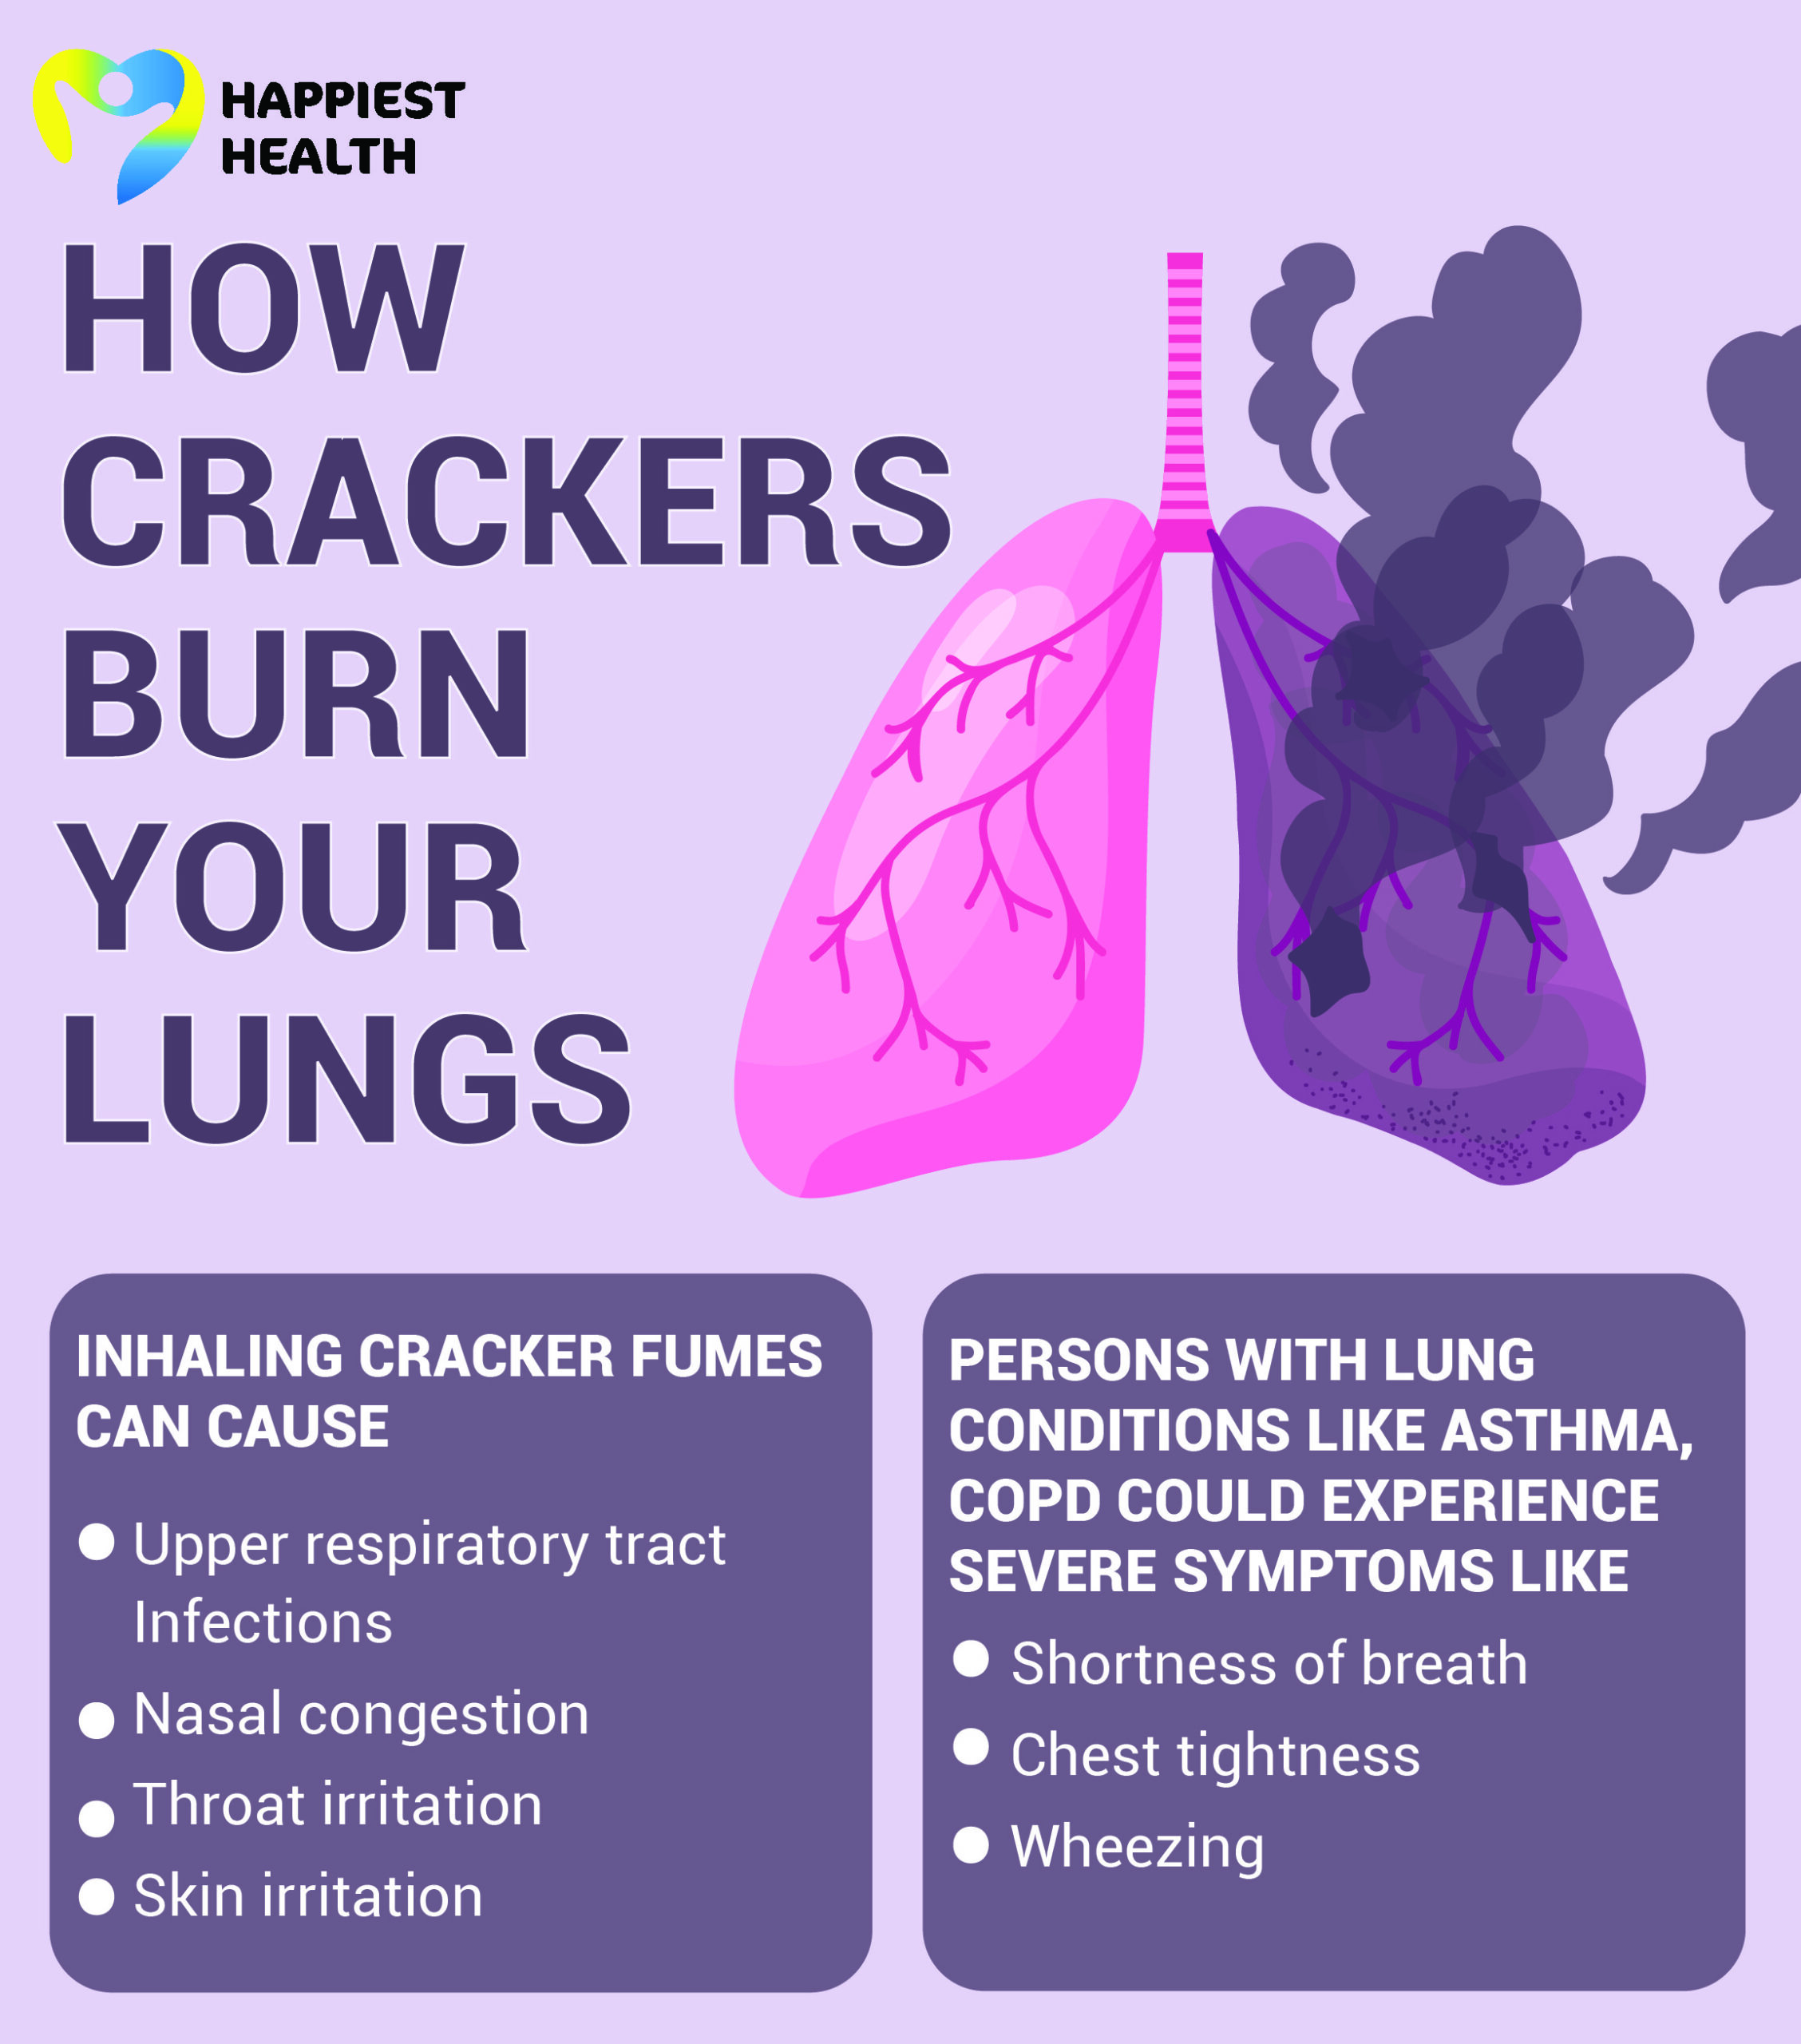 Effect of cracker pollution on lungs